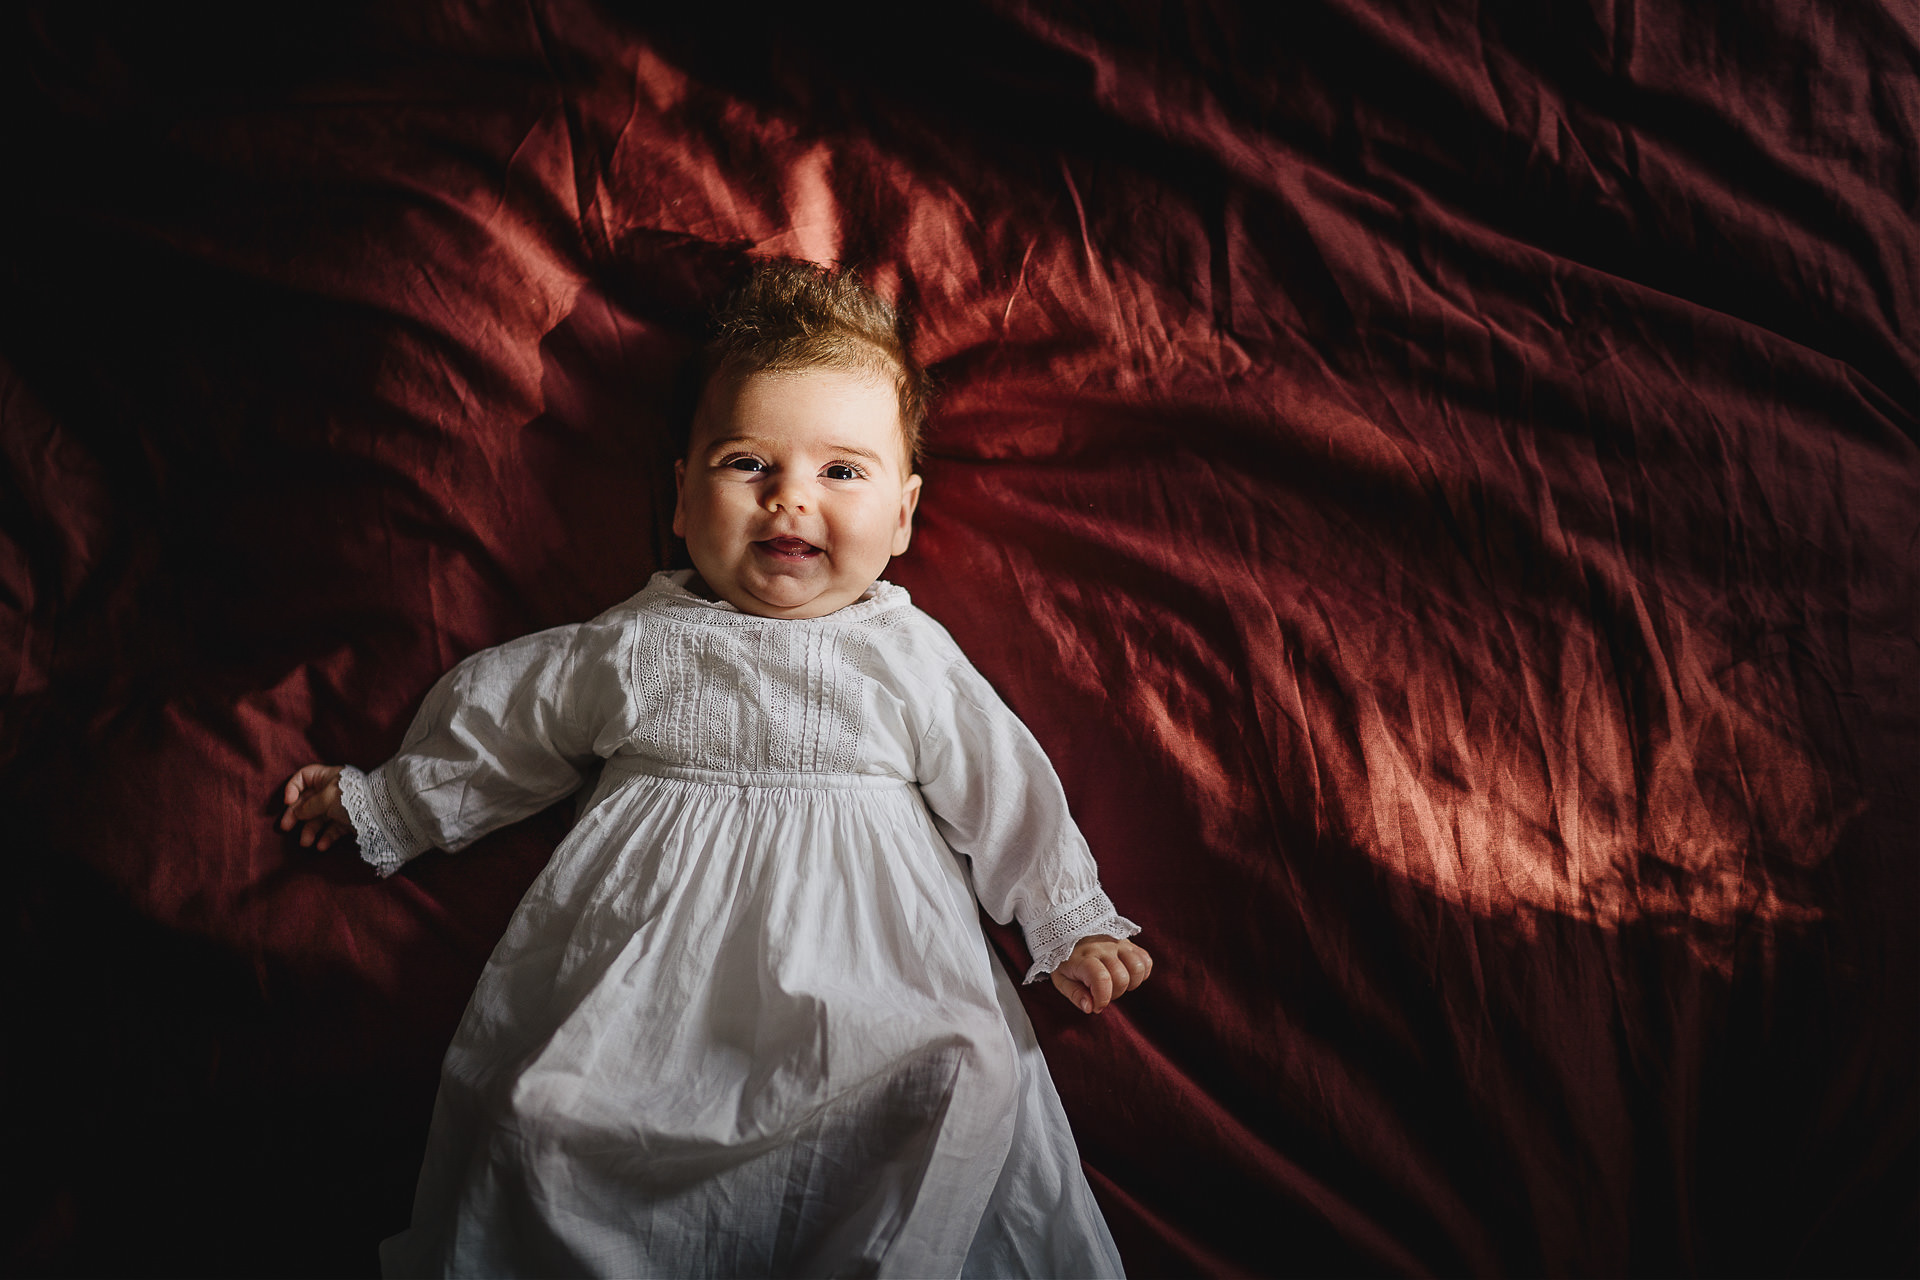 Photograph of a baby smiling on a red bed cover in the sunshine